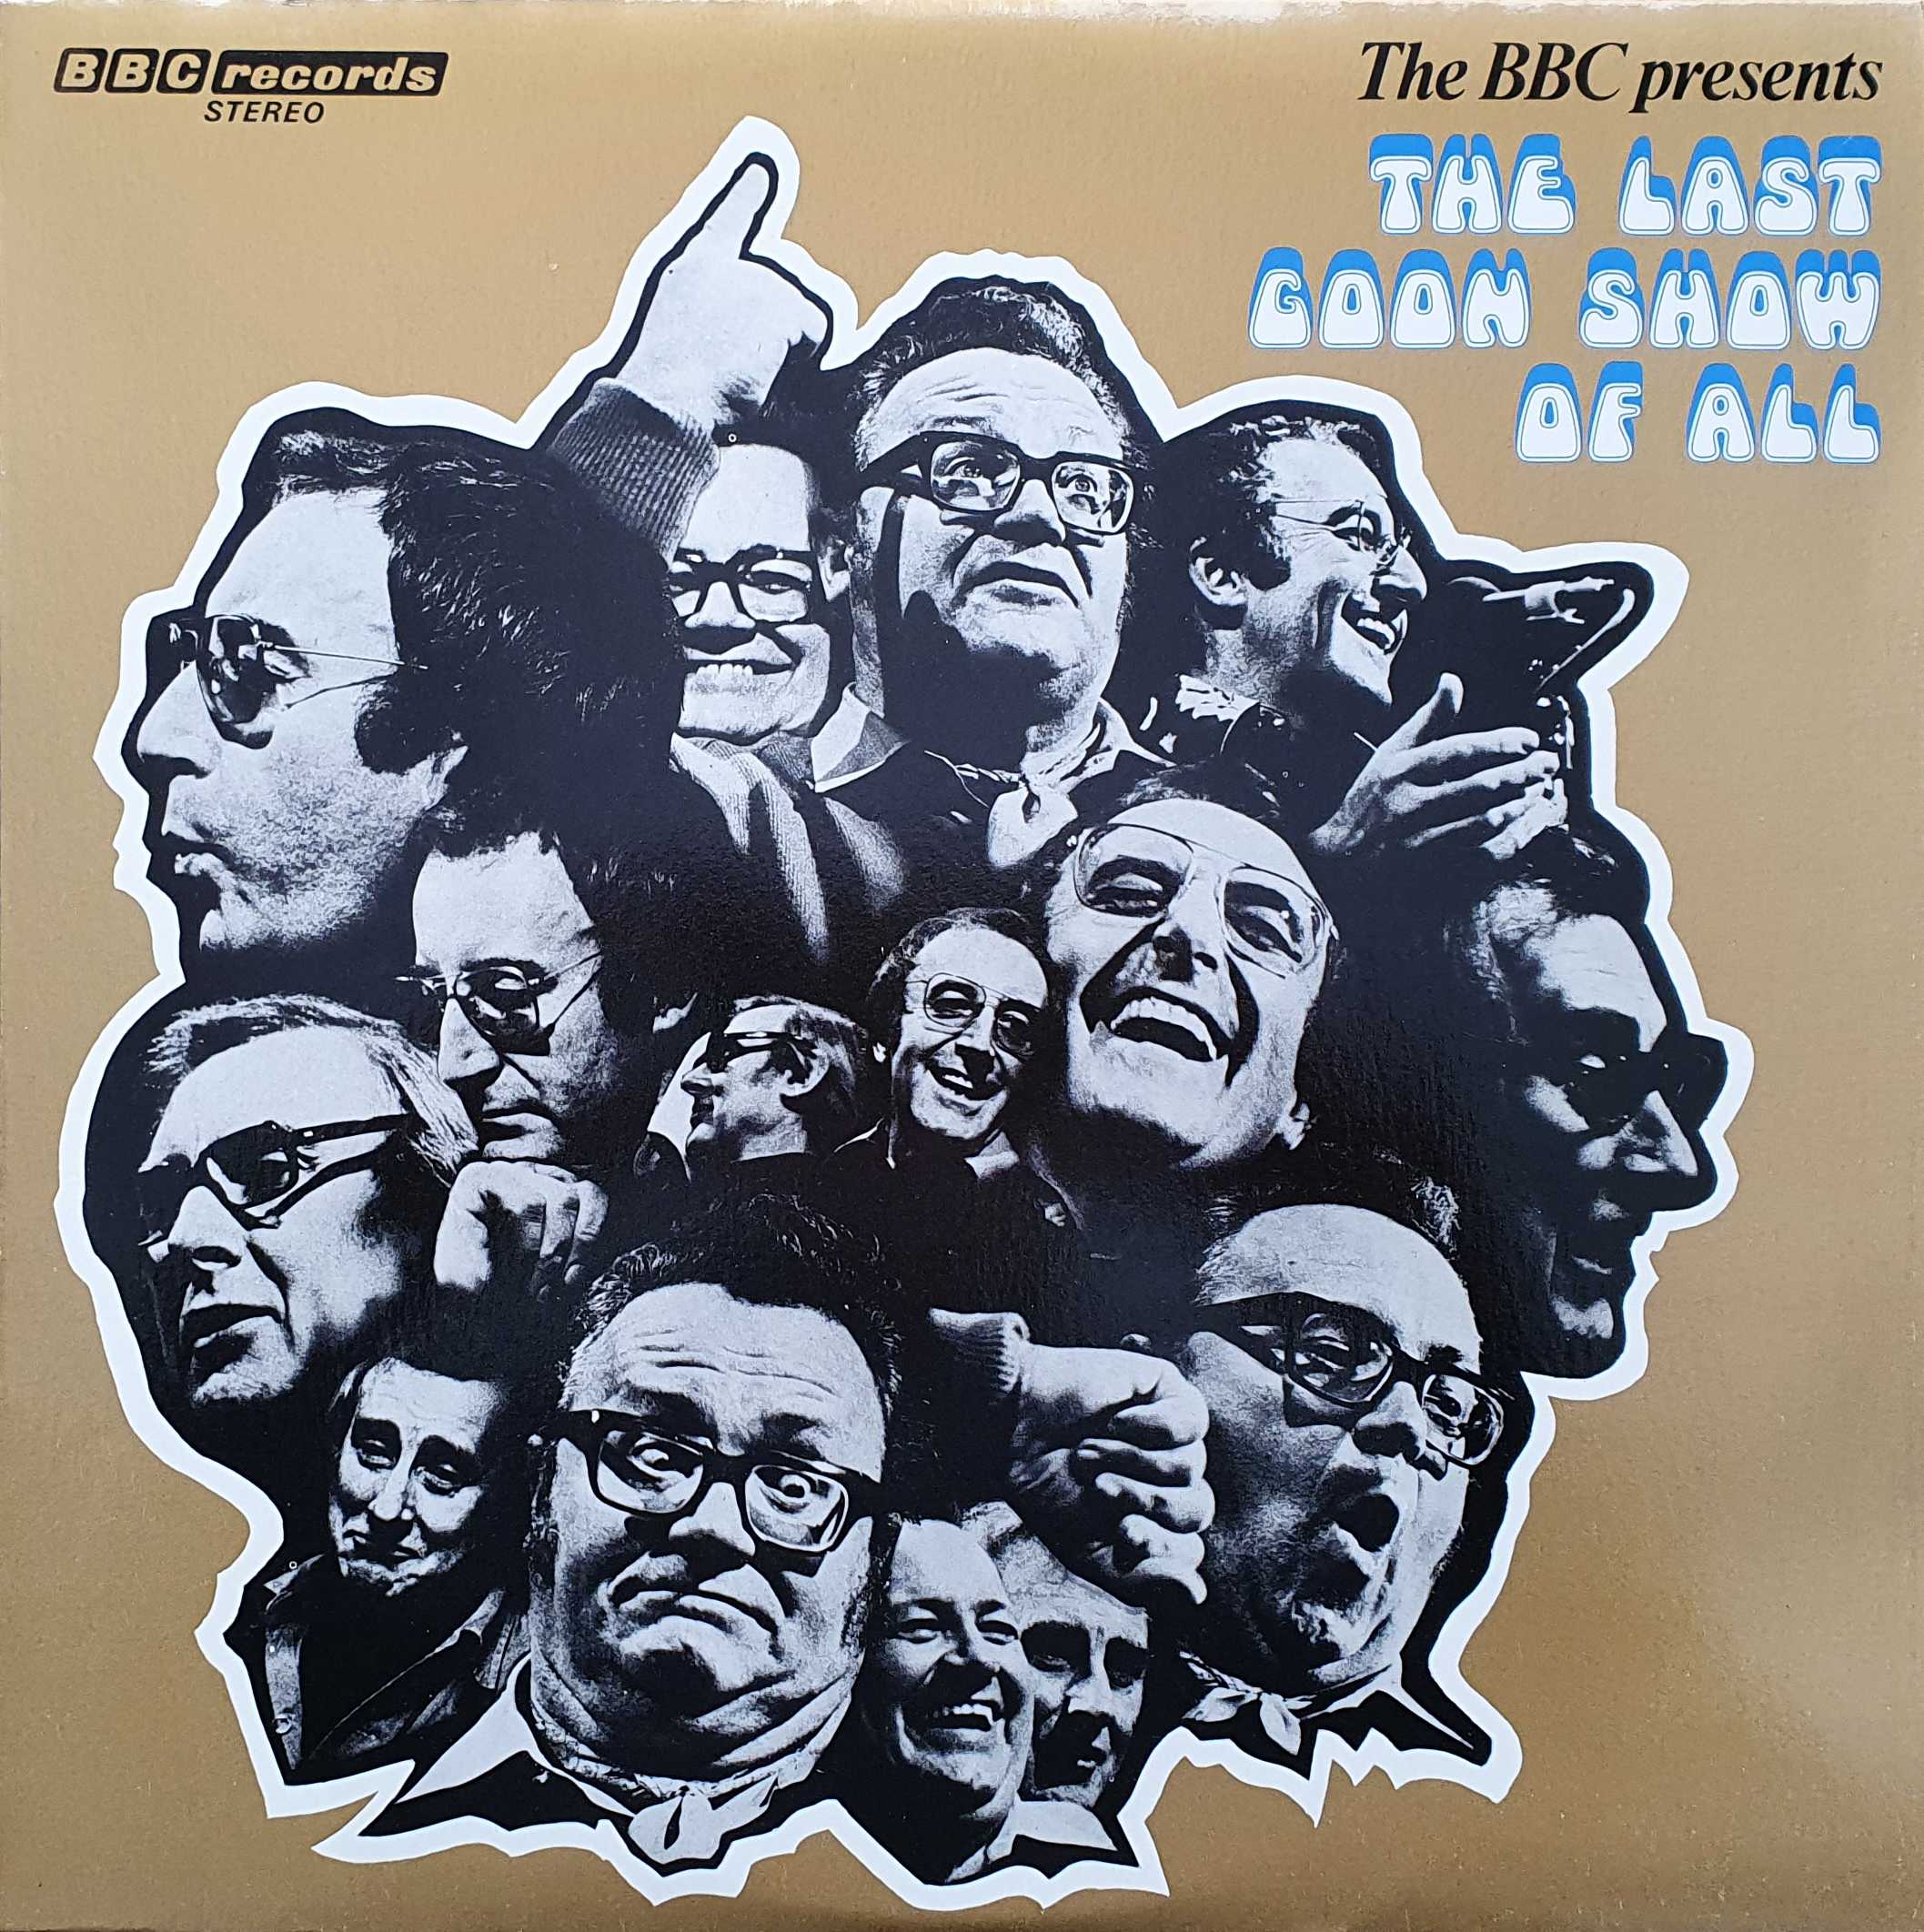 Picture of 2964 035 The last Goon Show of all by artist The Goon Show